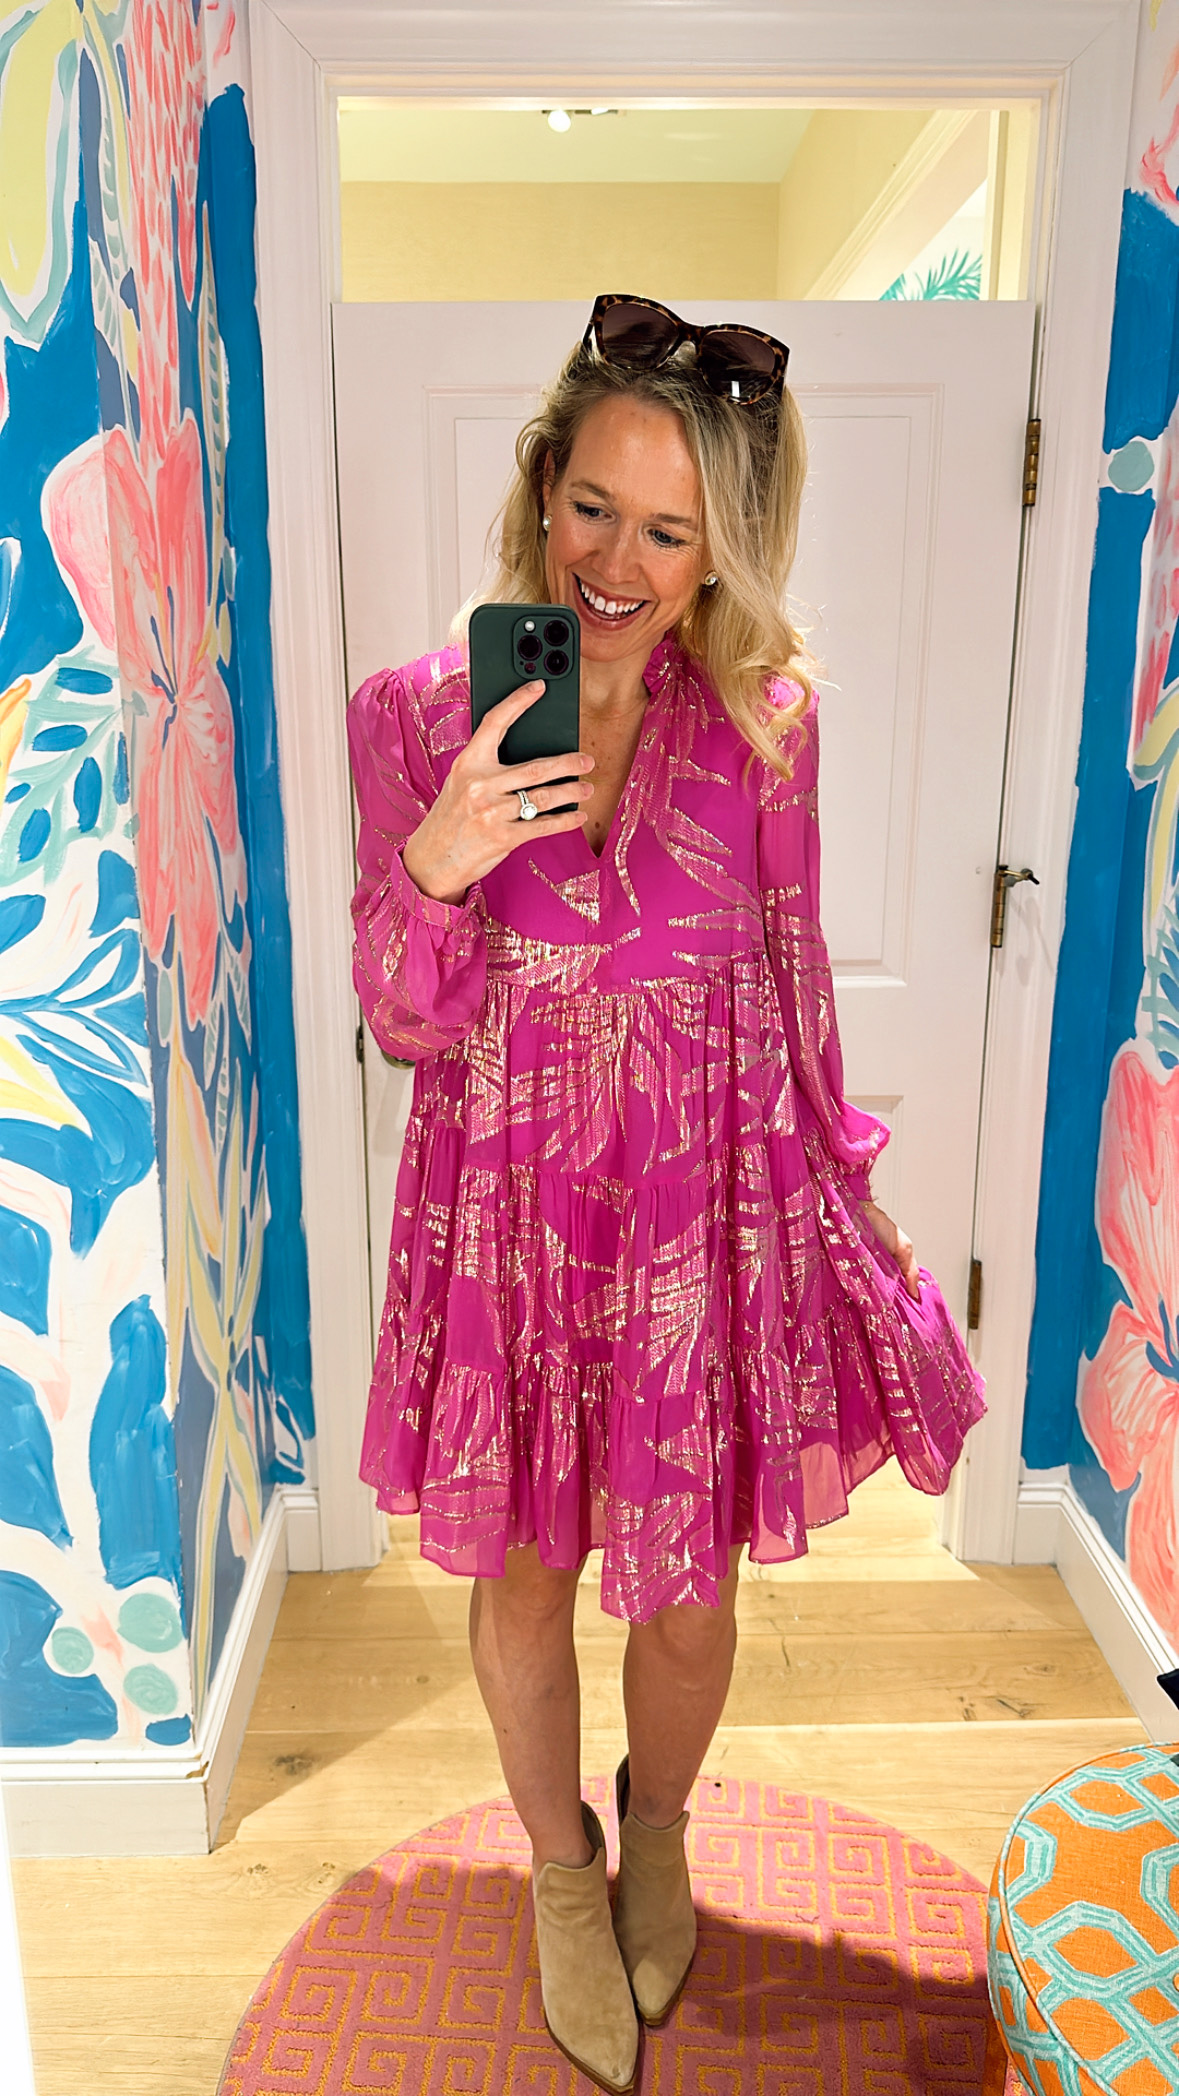 Winter 2023 Lilly Pulitzer Sale Guide | Lilly Pulitzer tips and predictions for the Lilly Sunshine Sale